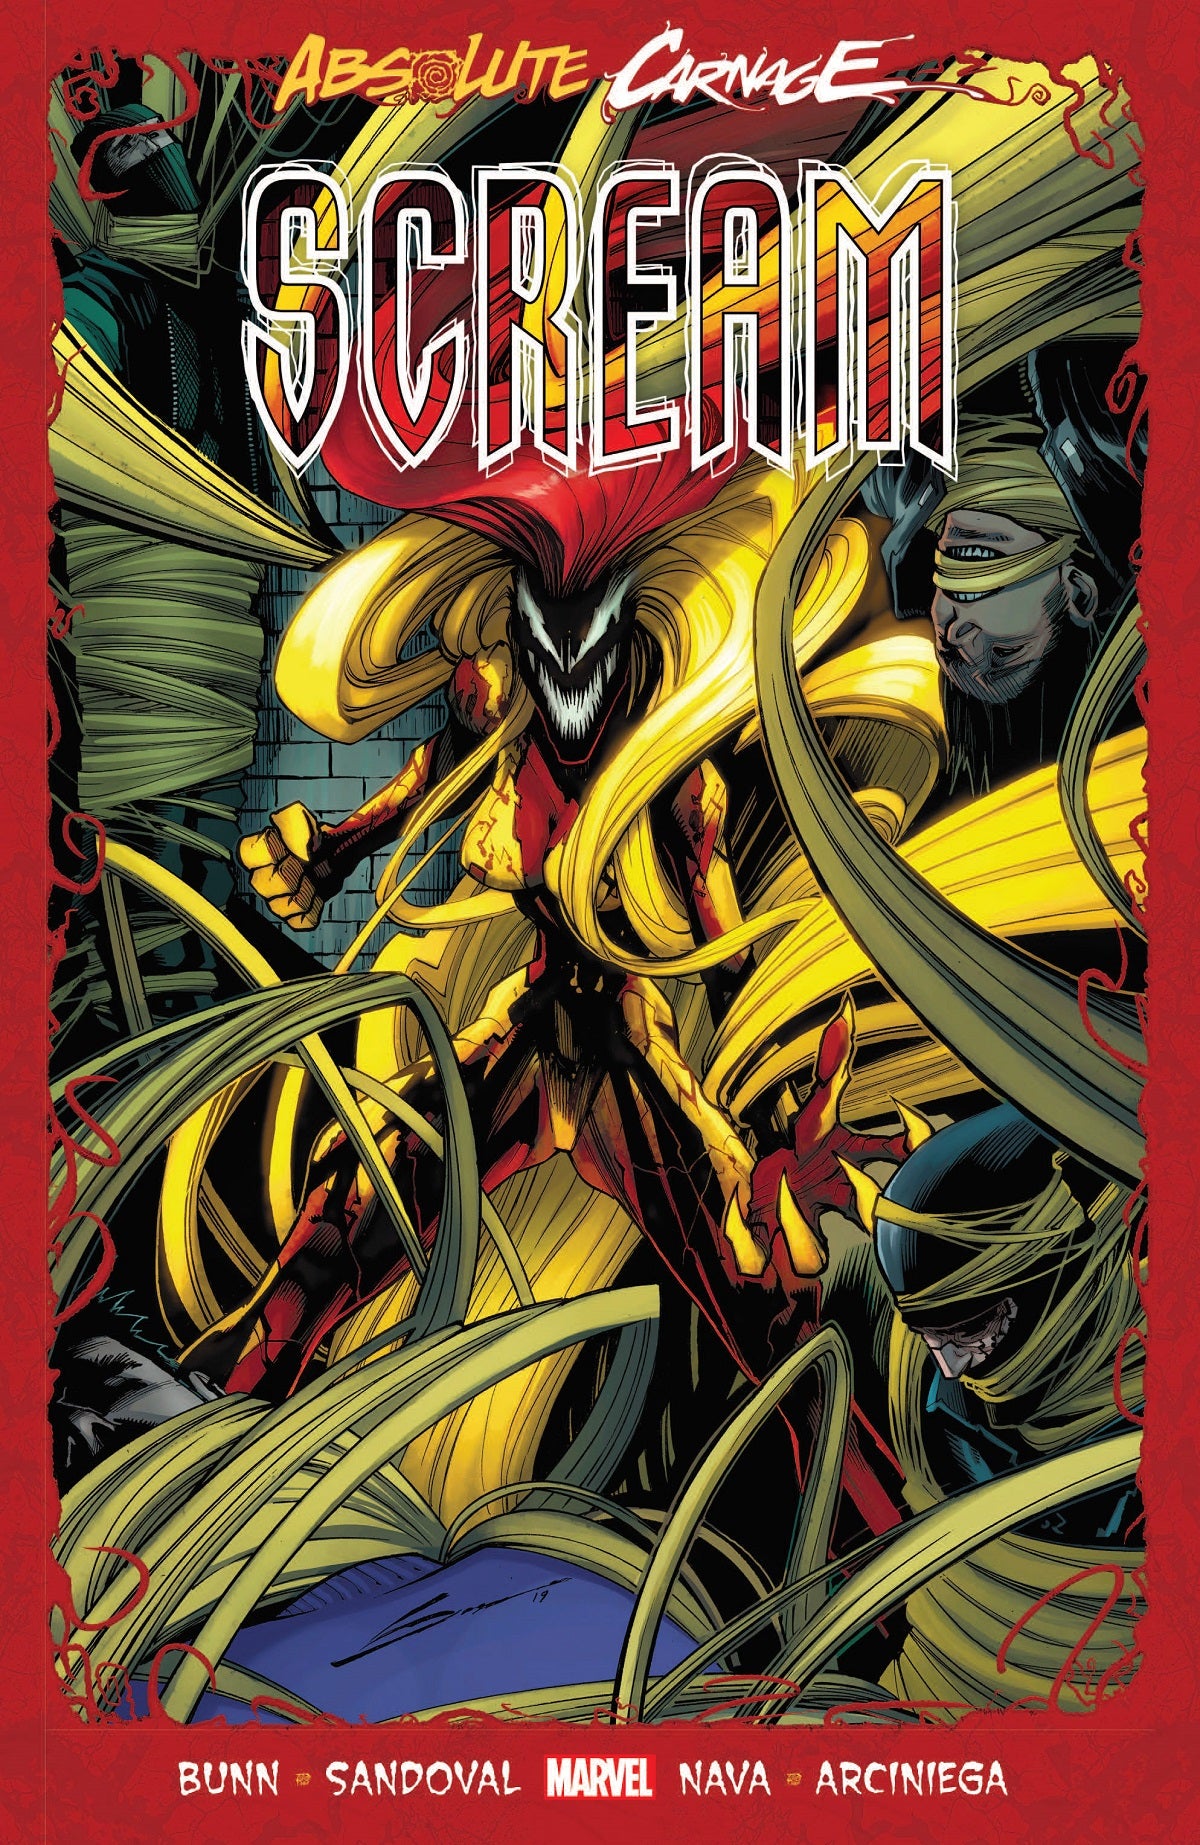 Absolute Carnage Scream Graphic Novel - Graphic Novel - The Hooded Goblin